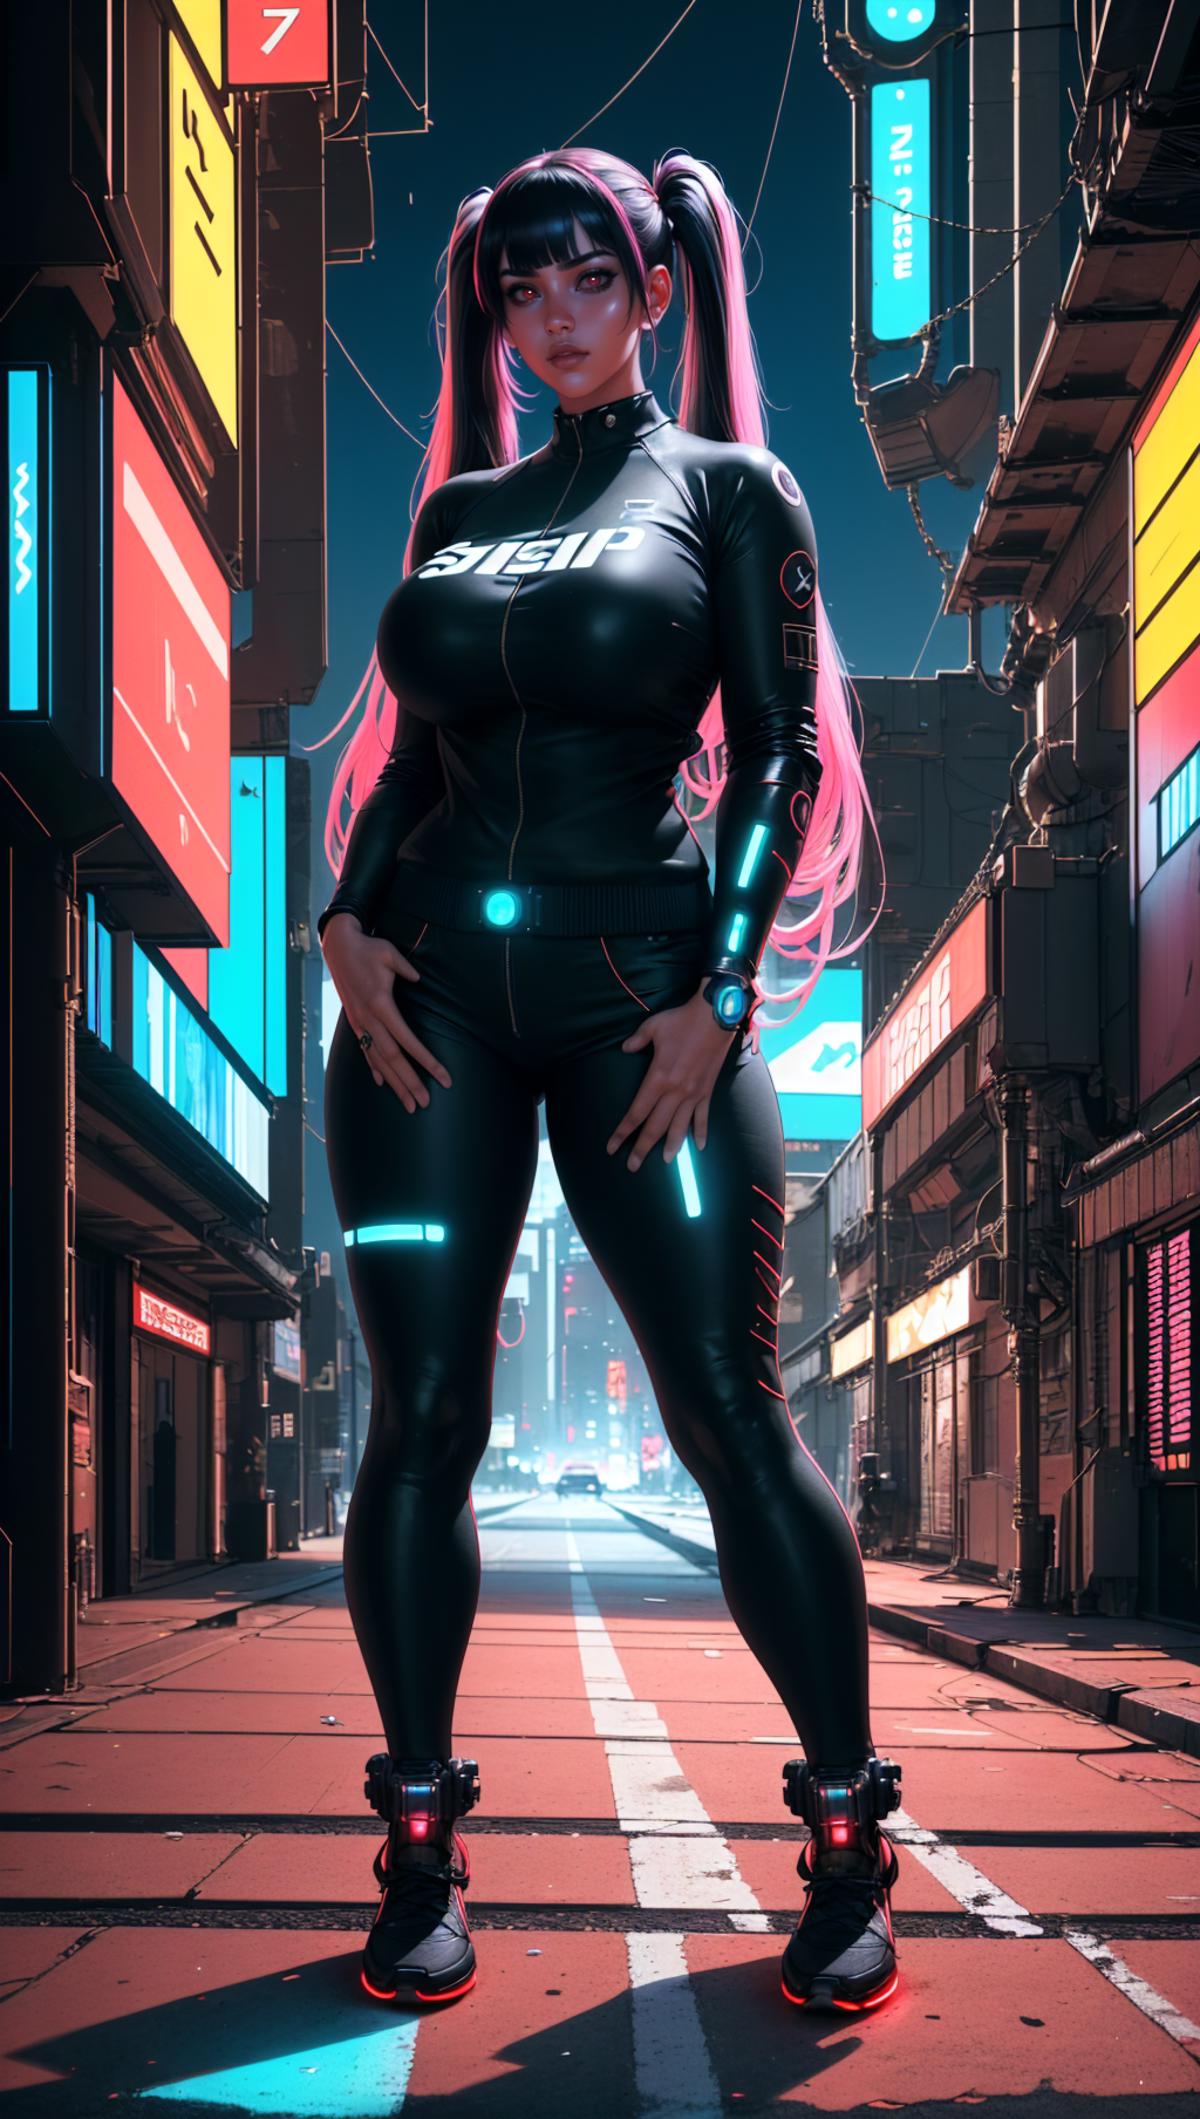 A woman in a black suit standing on a city street.